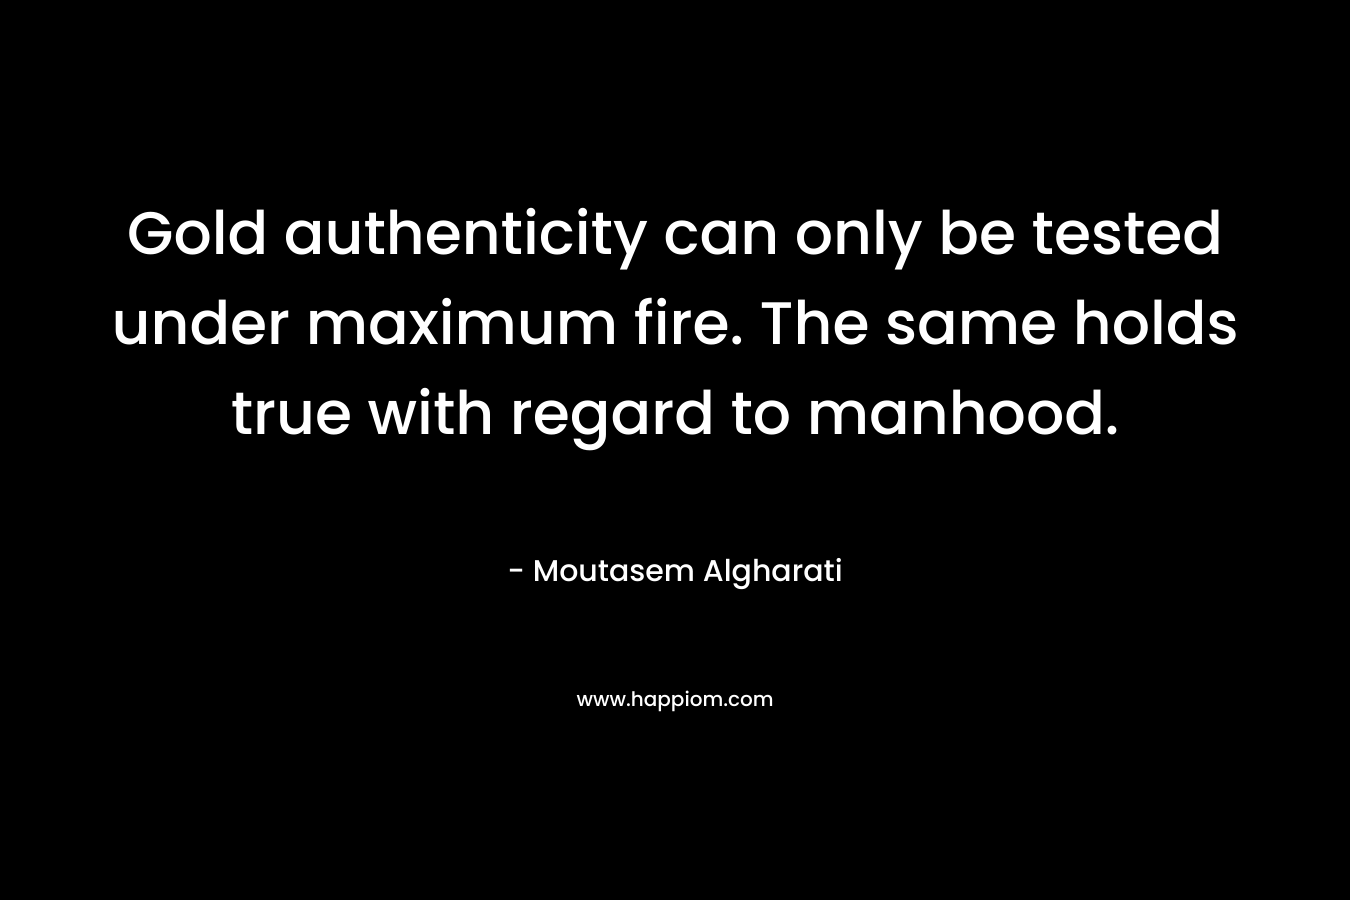 Gold authenticity can only be tested under maximum fire. The same holds true with regard to manhood. – Moutasem Algharati